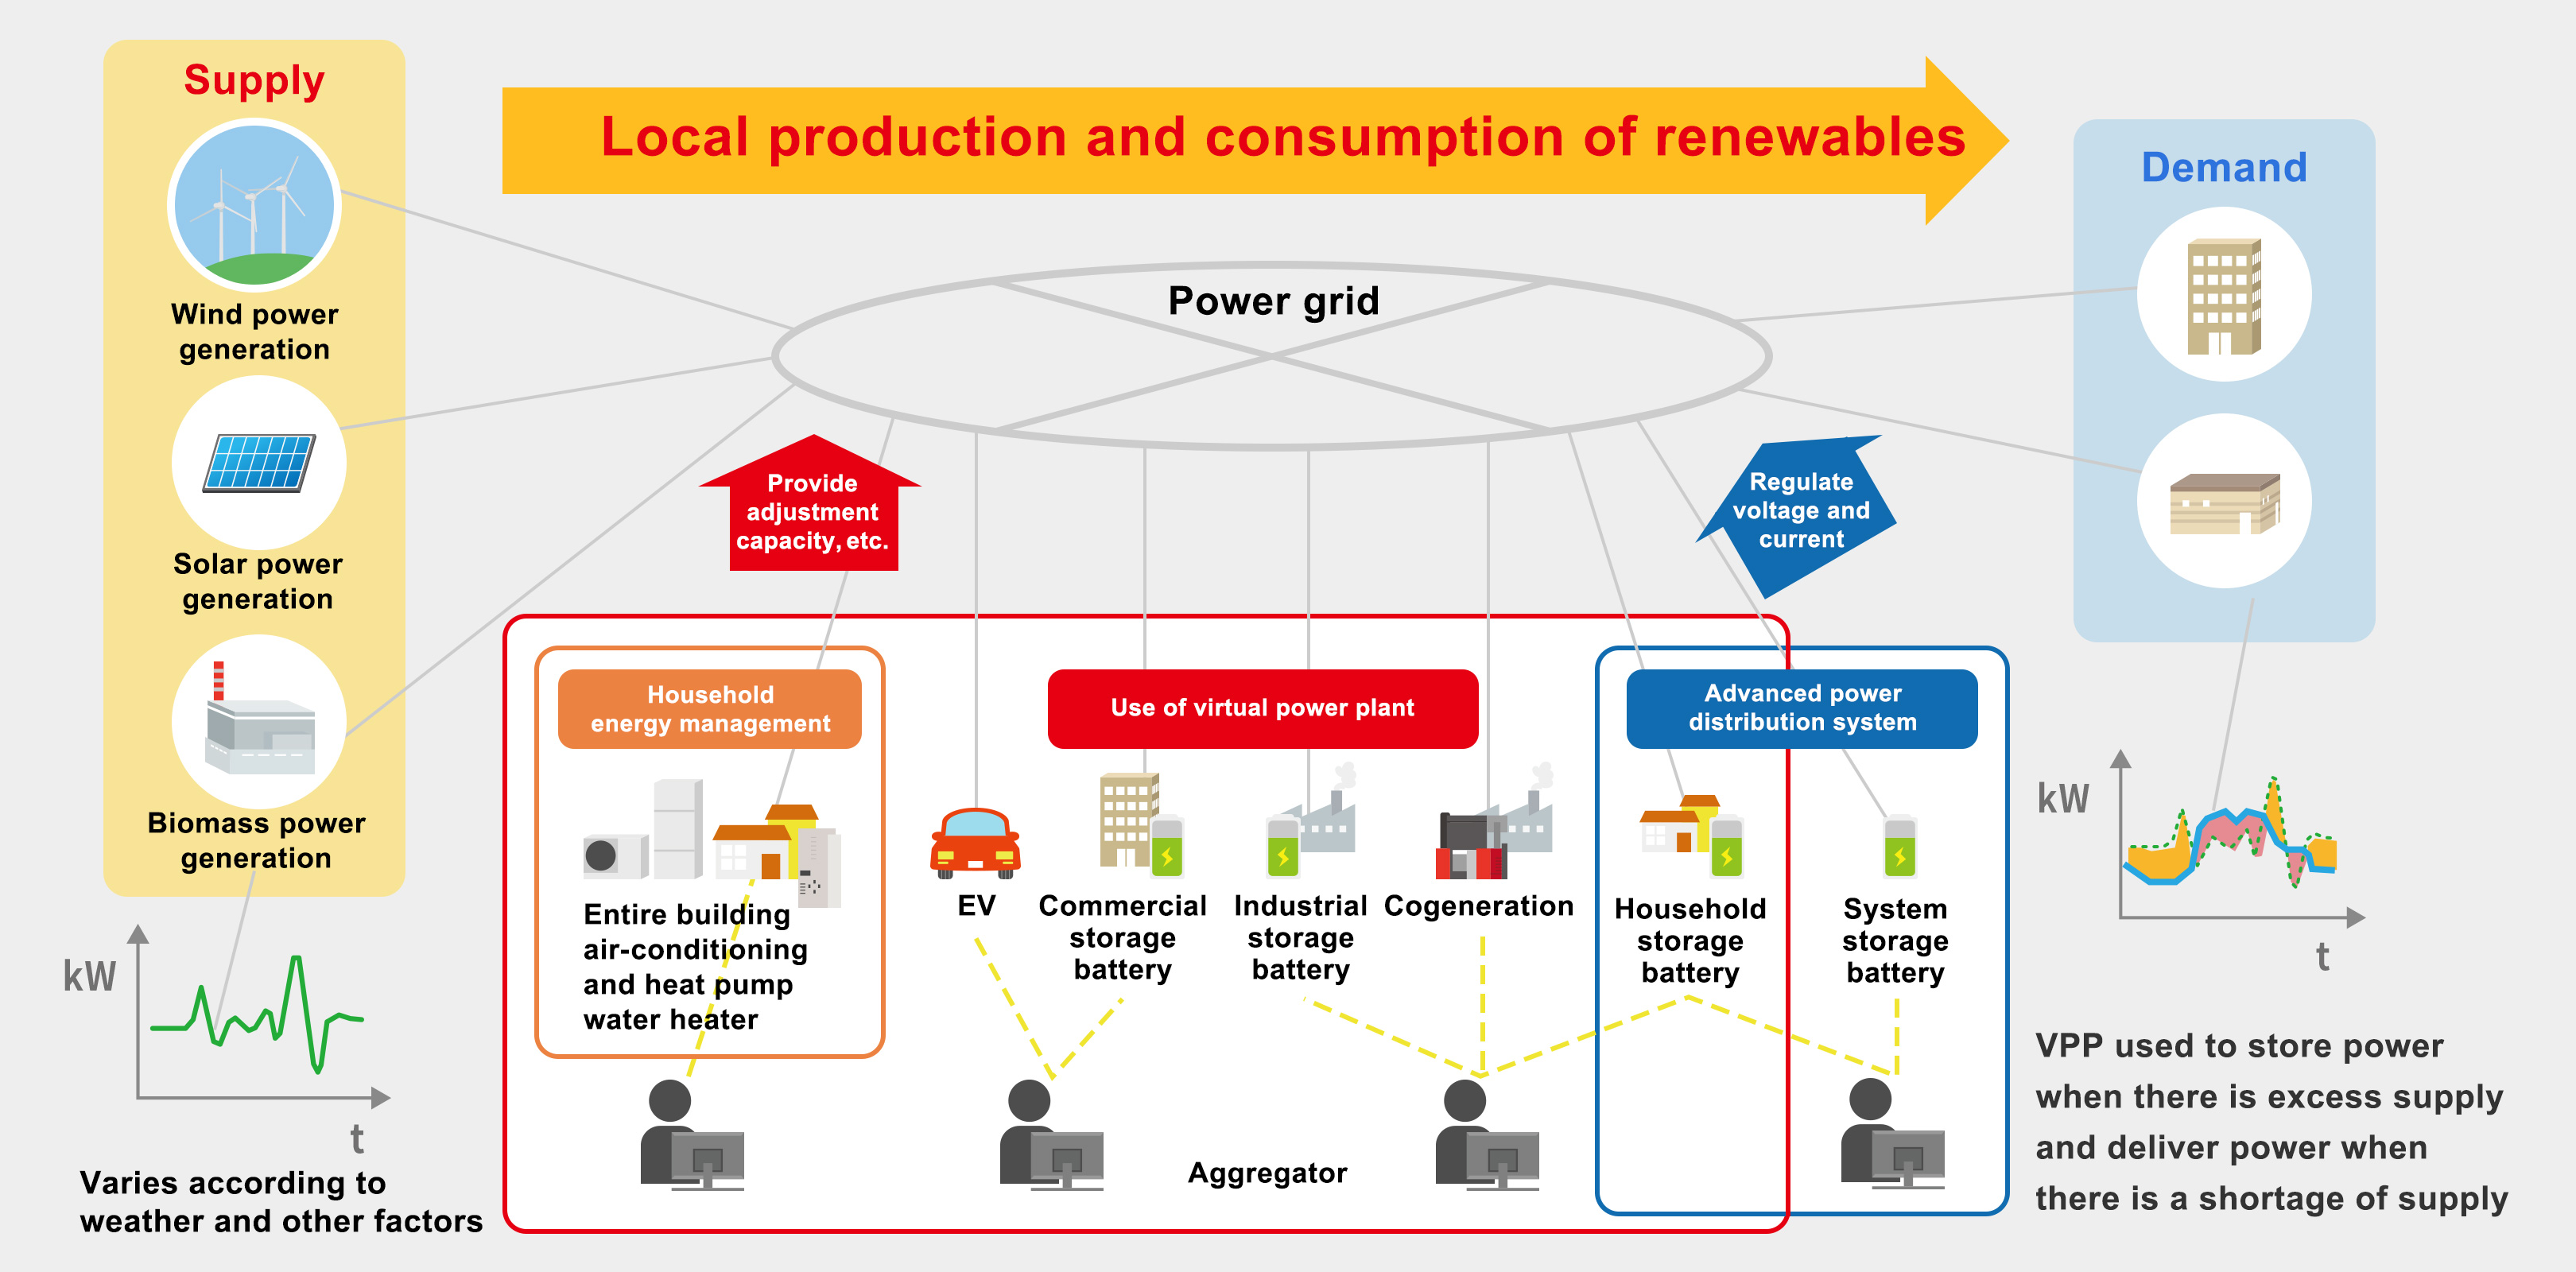 Advanced Power Distribution System Operation, Effective Use of Renewables, and Local Production for Local Consumption